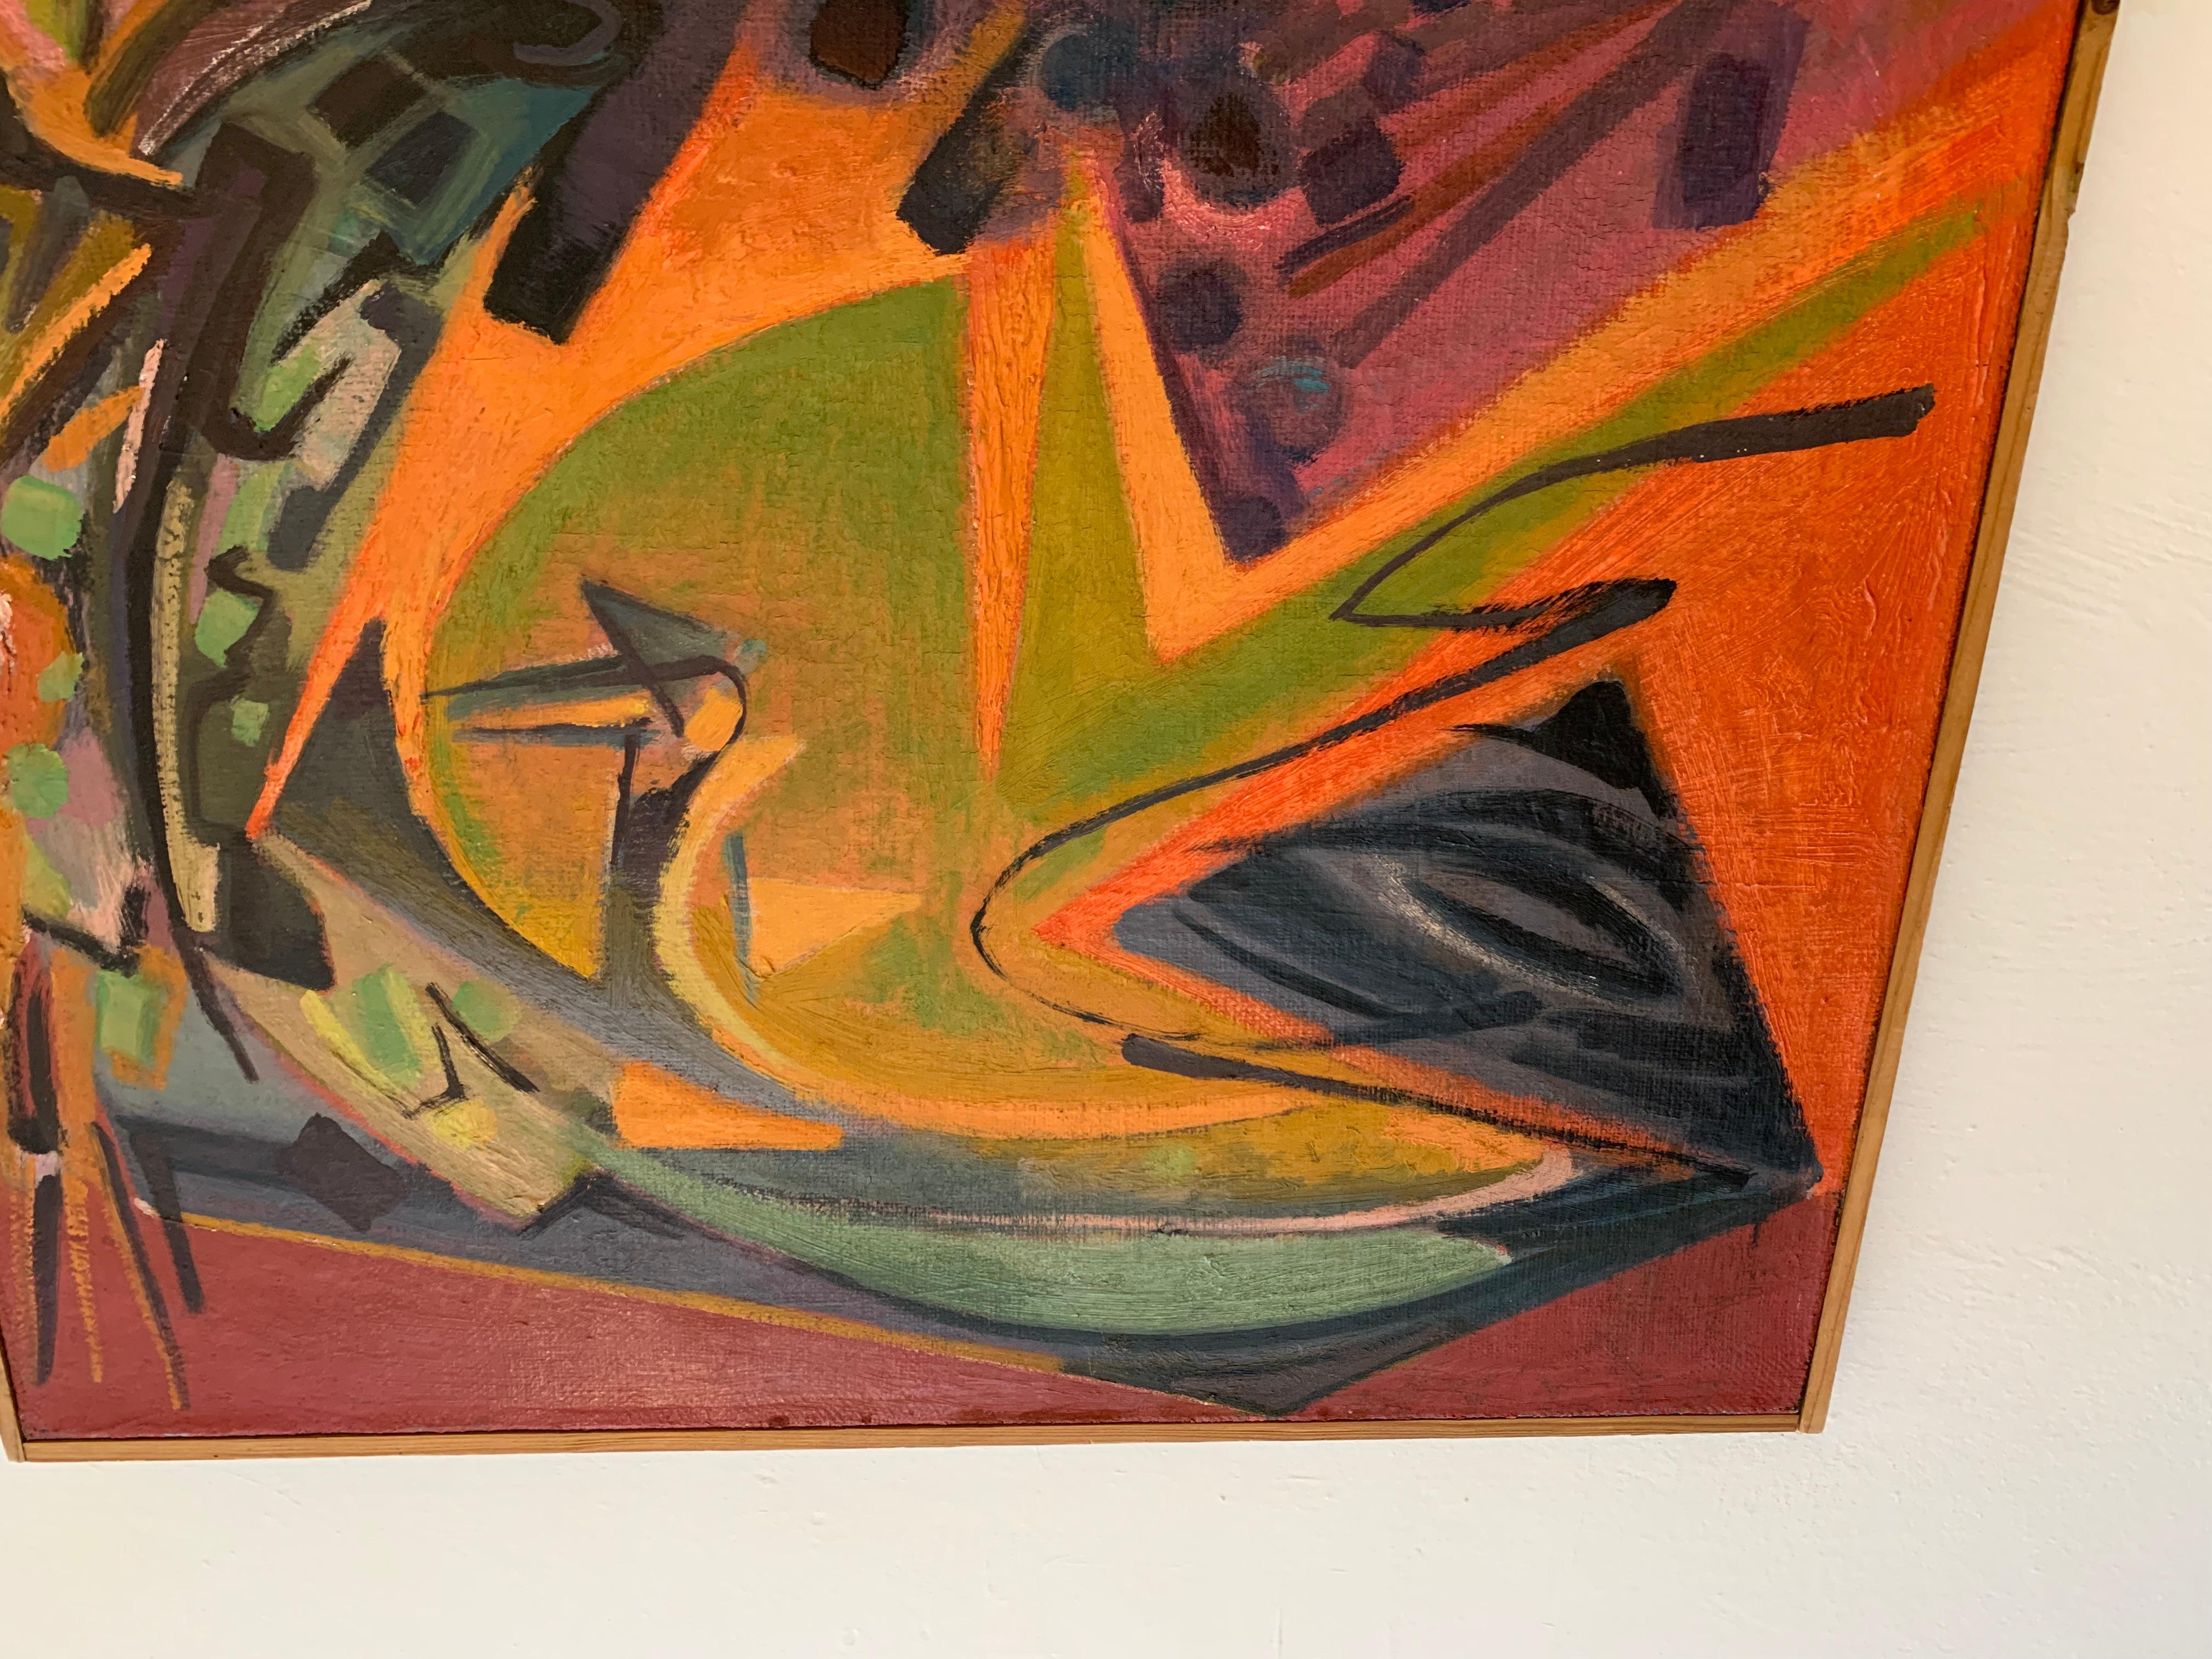 20th Century Provencal Rhythm Painting by Swedish Artist Ecke Hernæus Student of André Lhote